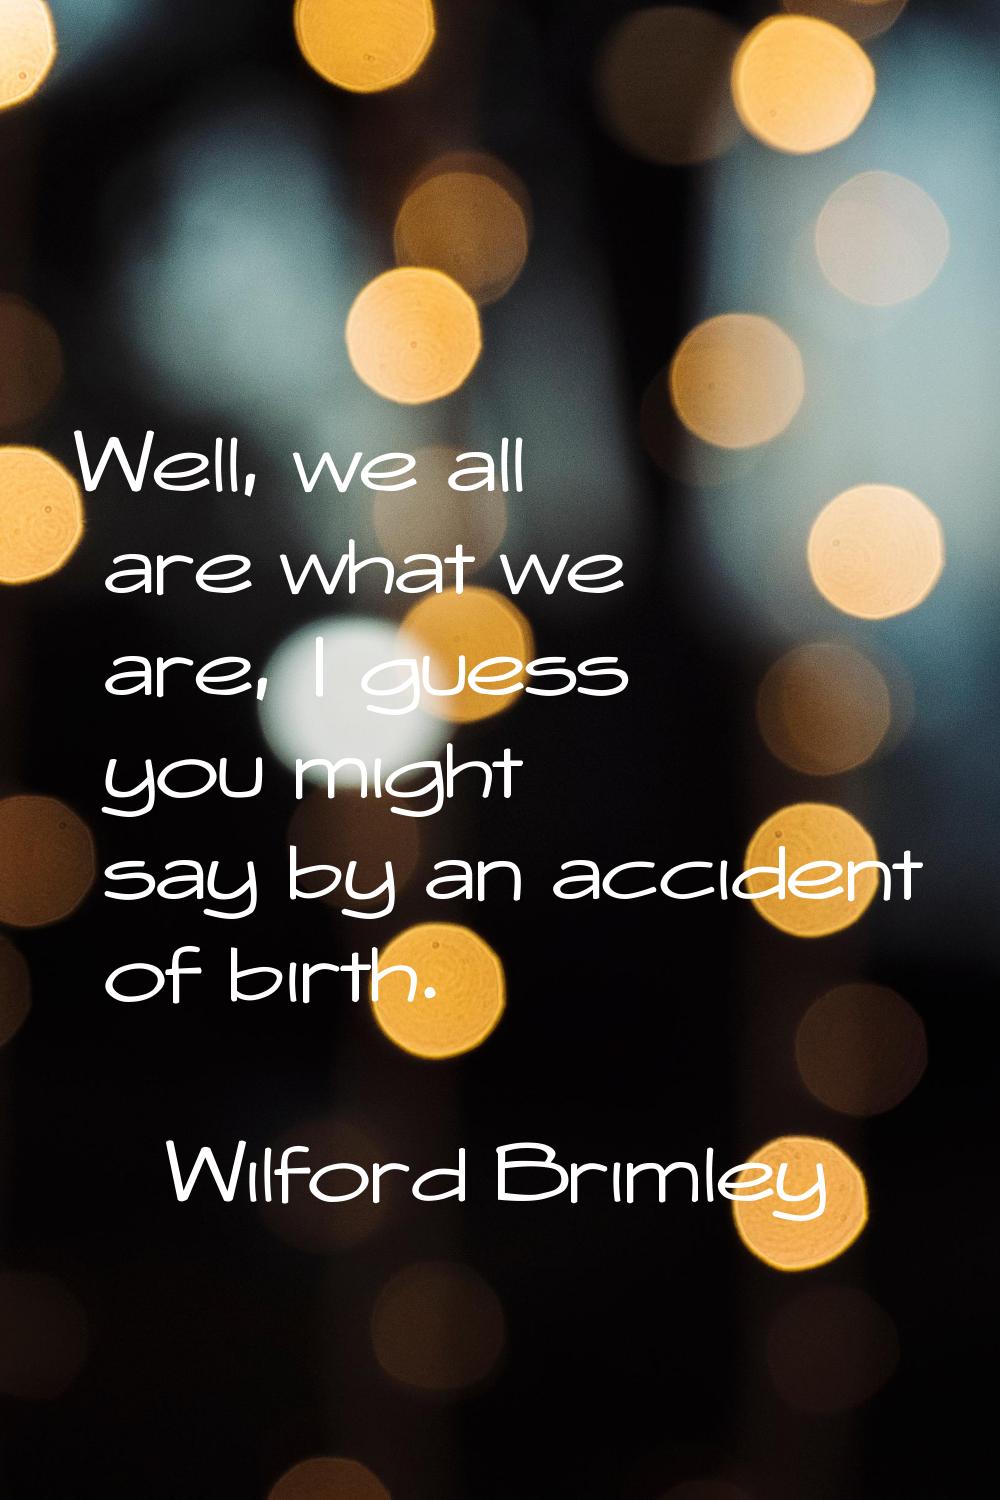 Well, we all are what we are, I guess you might say by an accident of birth.